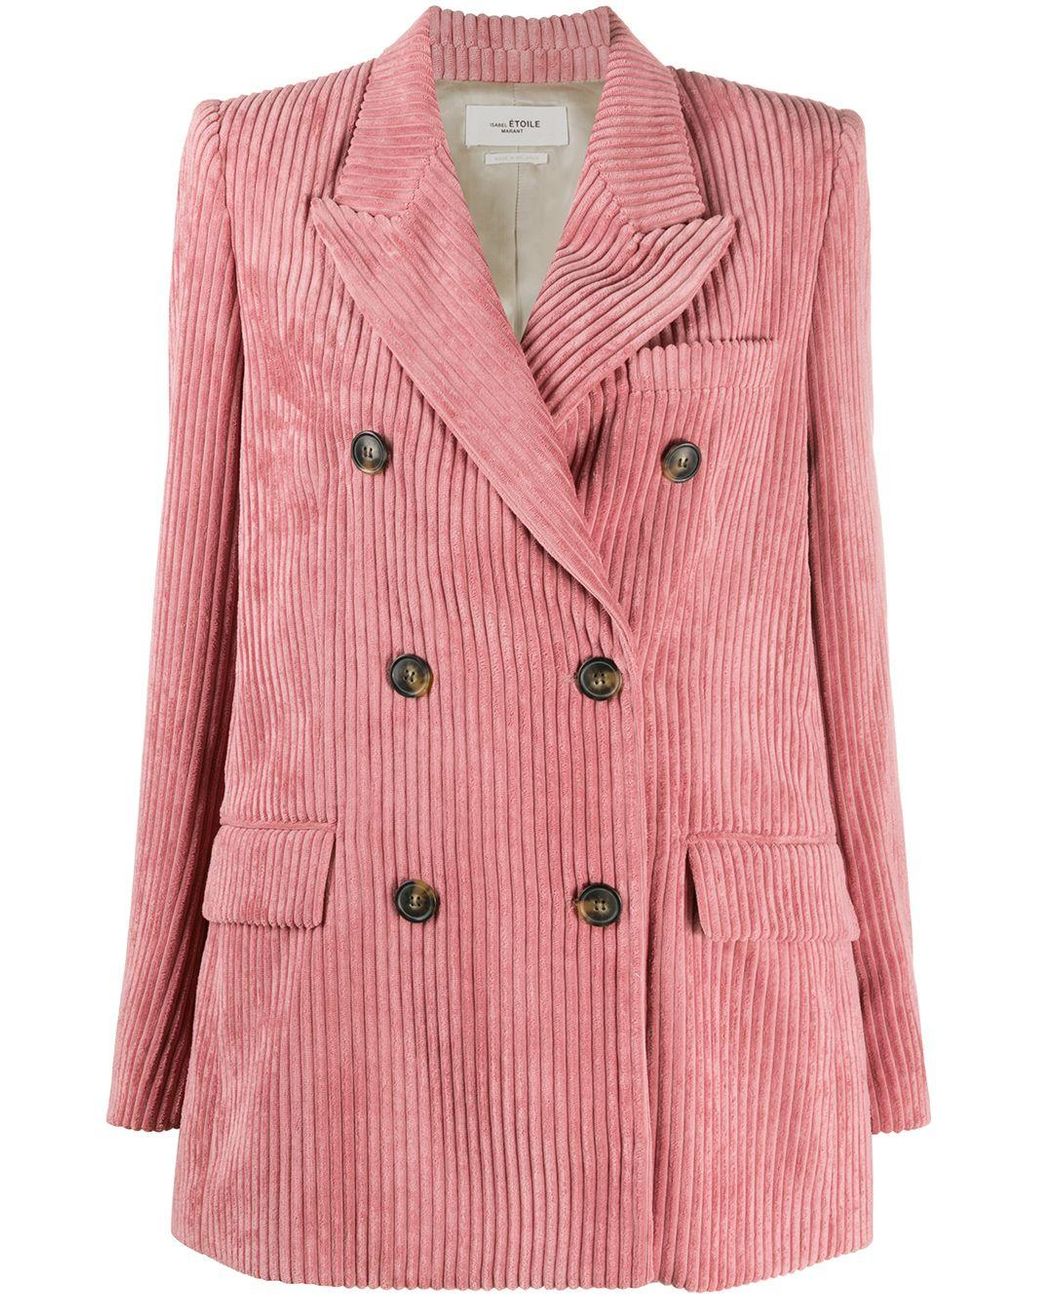 Étoile Isabel Marant Corduroy Double Breasted Blazer in Pink - Lyst